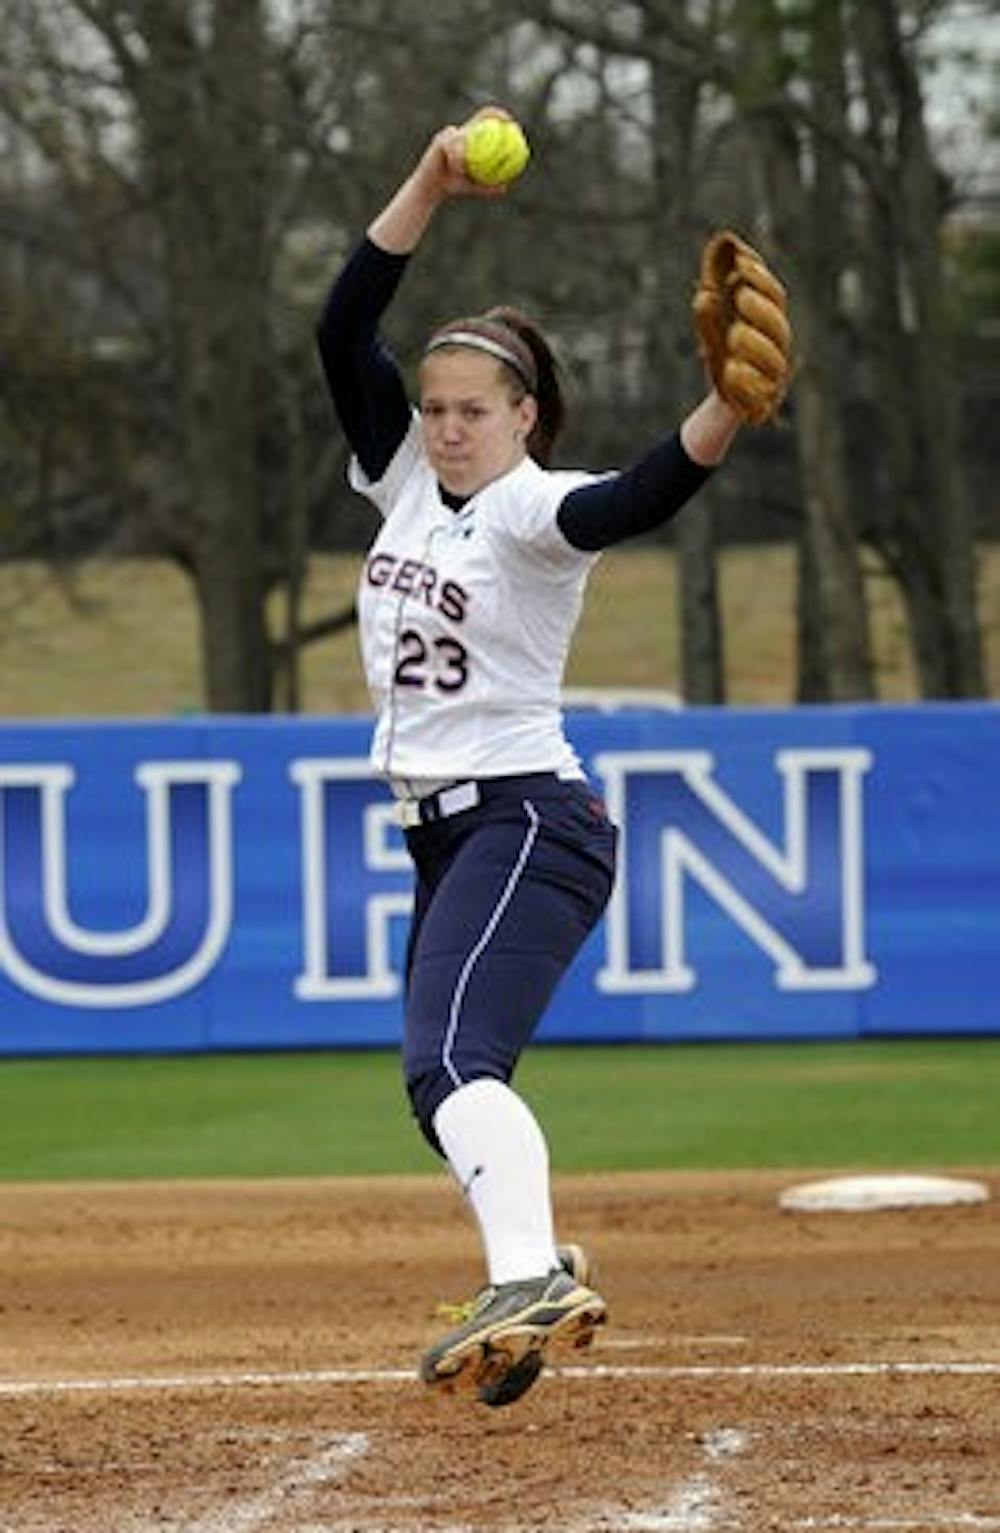 Auburn's Lexi Davis pitches in a game against Purdue. (Contributed by Anthony Hall)